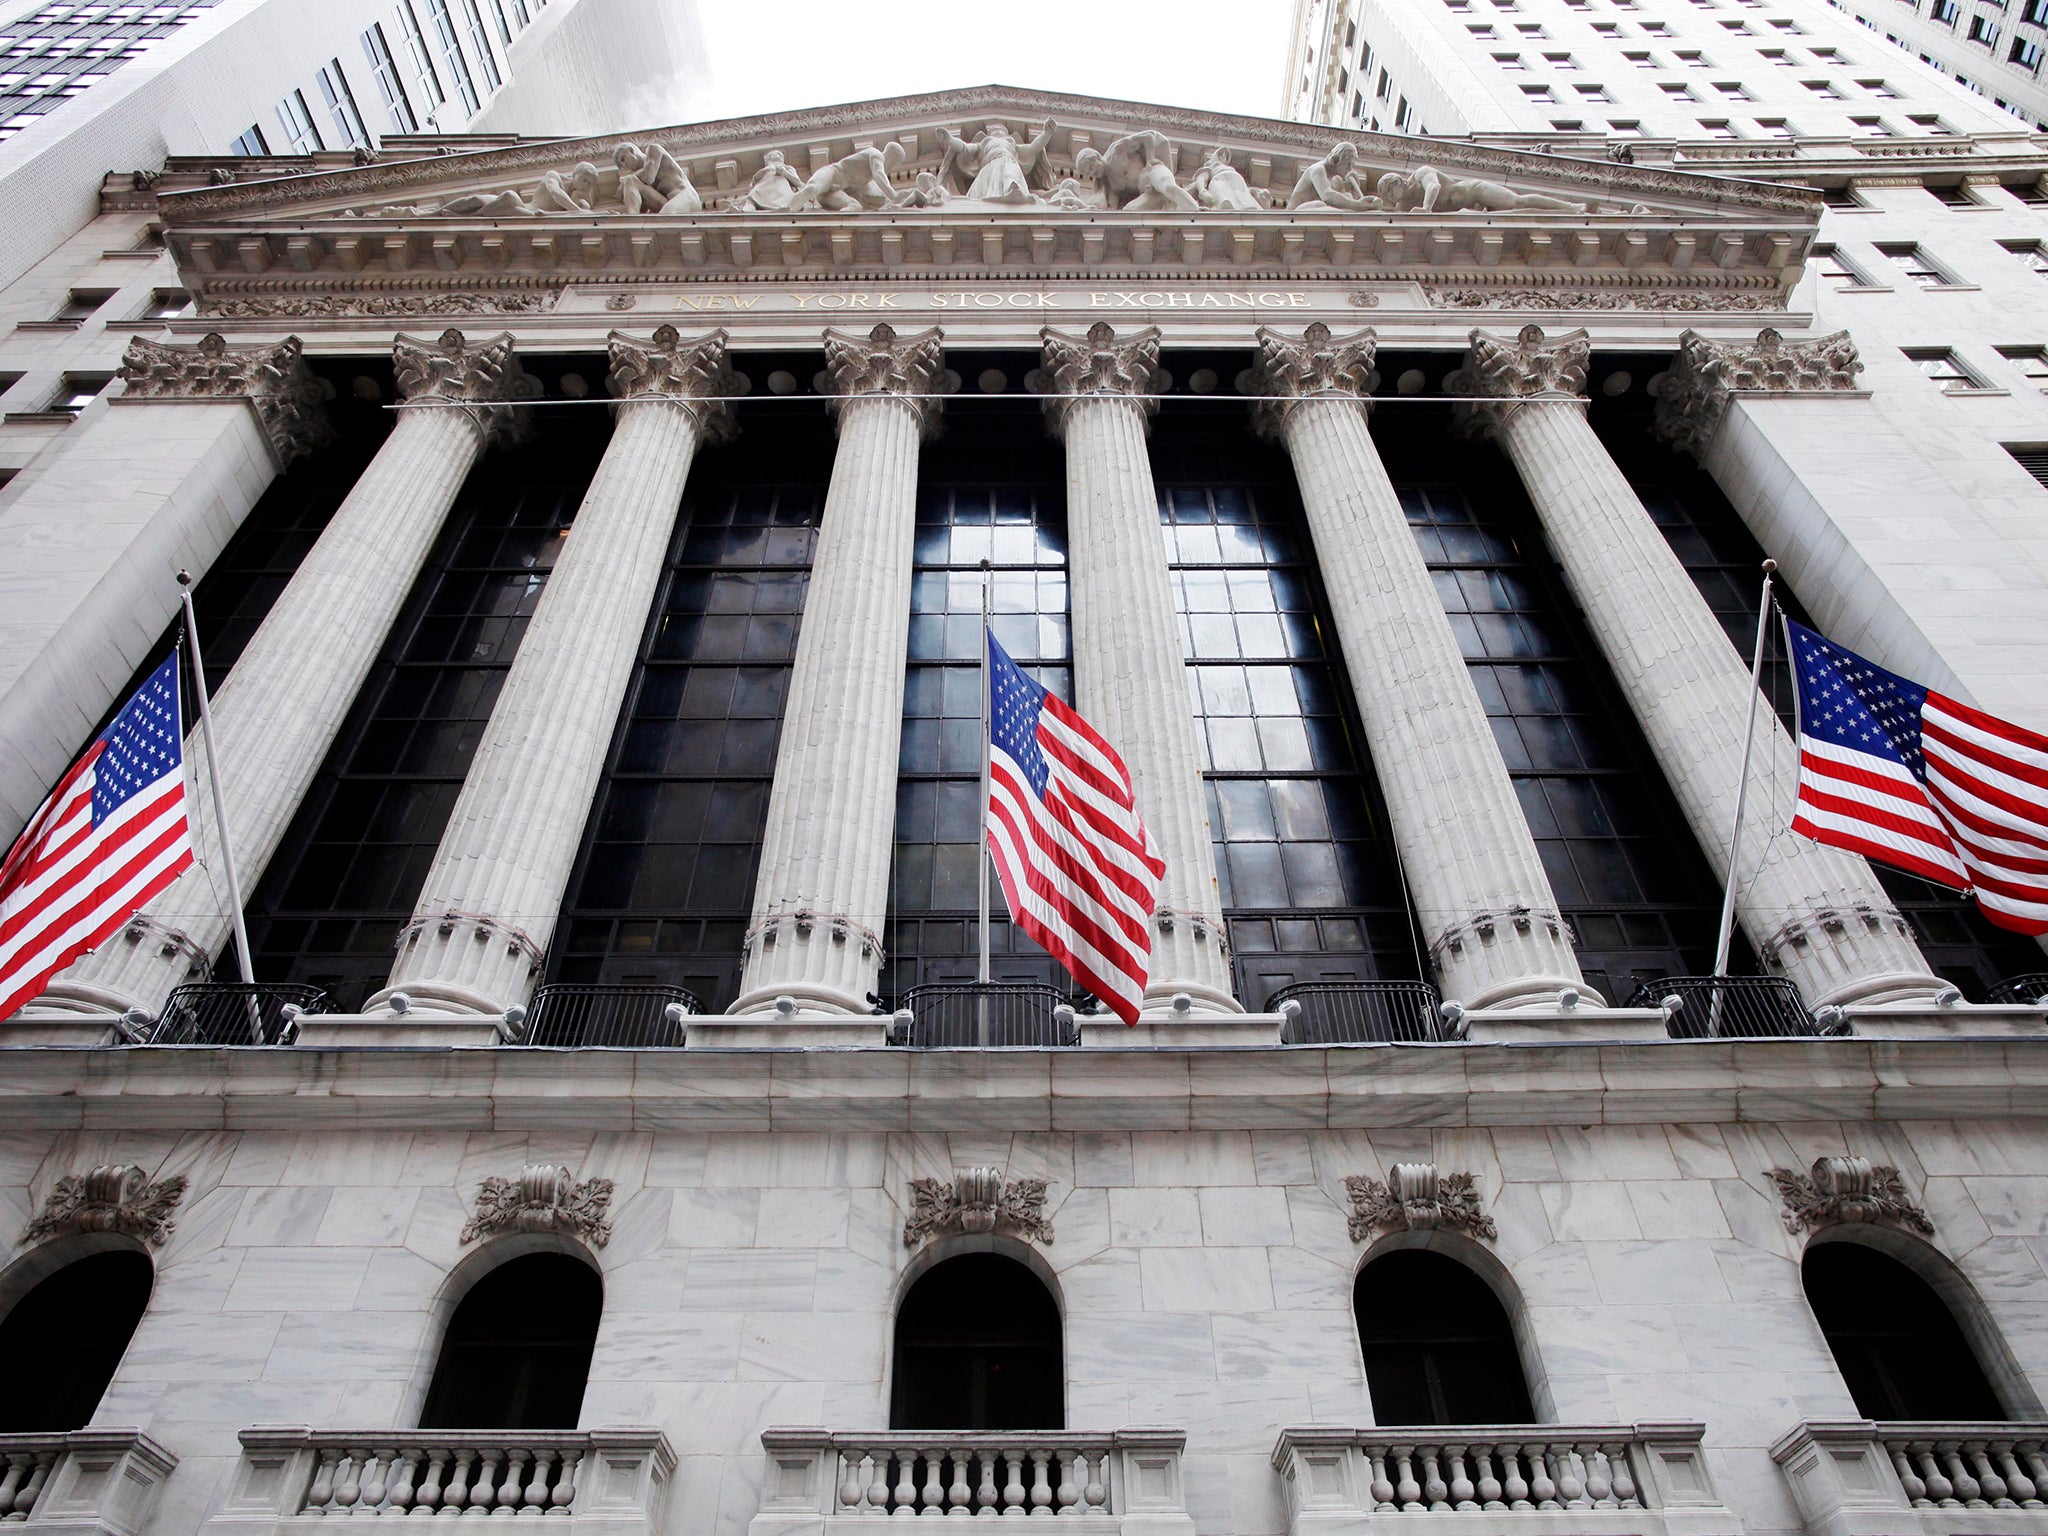 American flags fly in front of the New York Stock Exchange